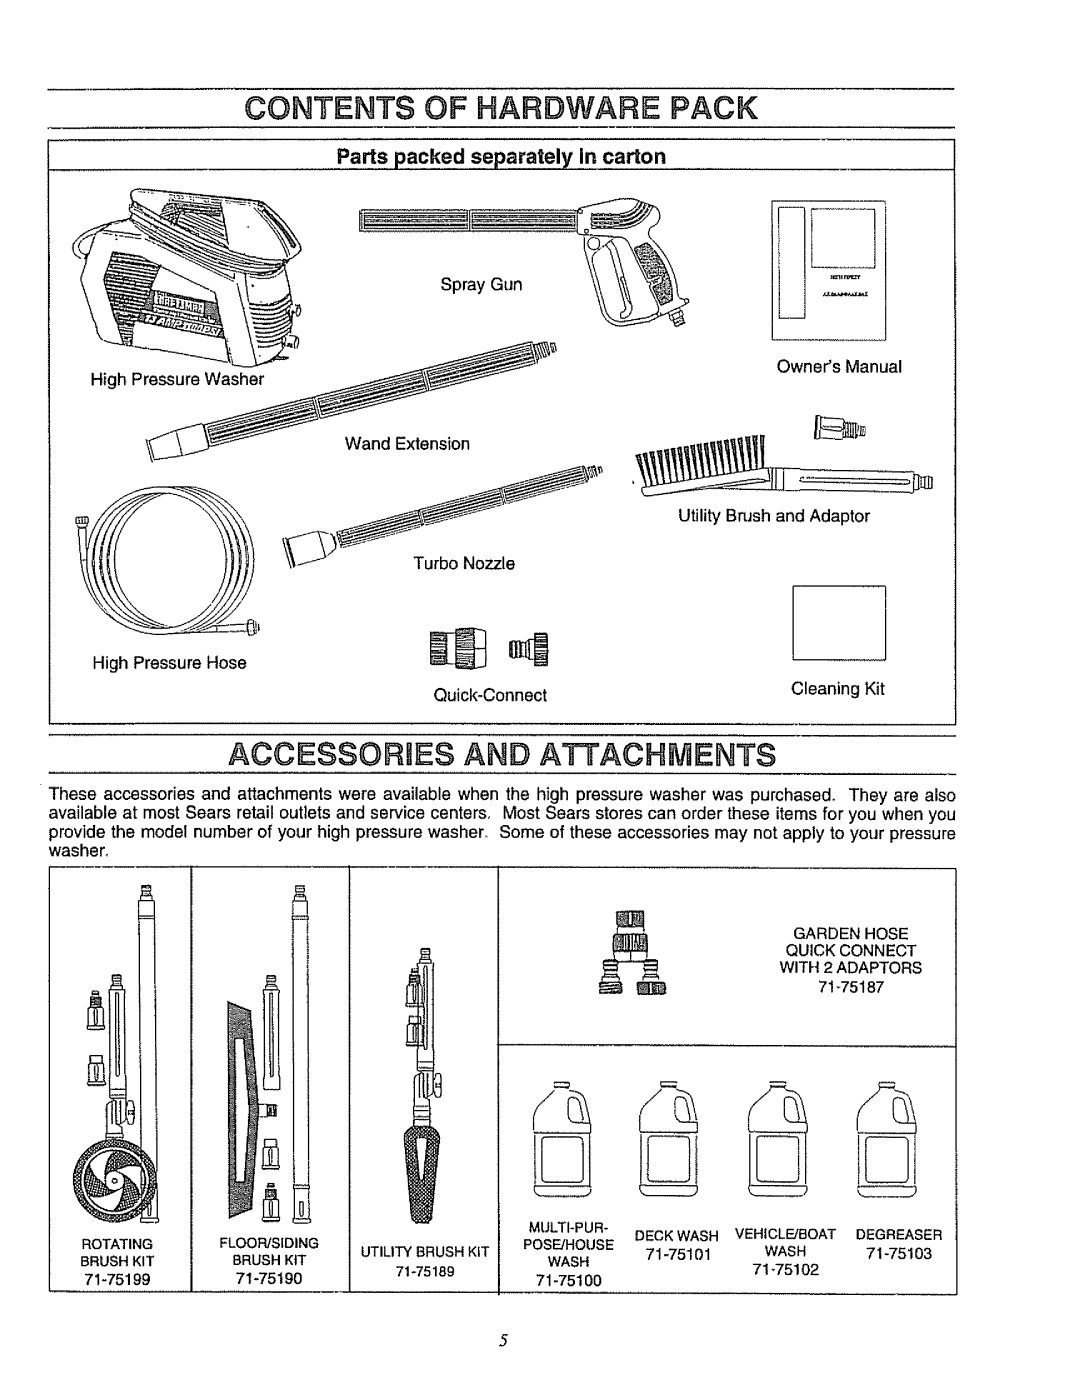 Sears 580.75133 owner manual Contents Of Hardware Pack, Accessories And Attachments, Parts packed separately In carton 